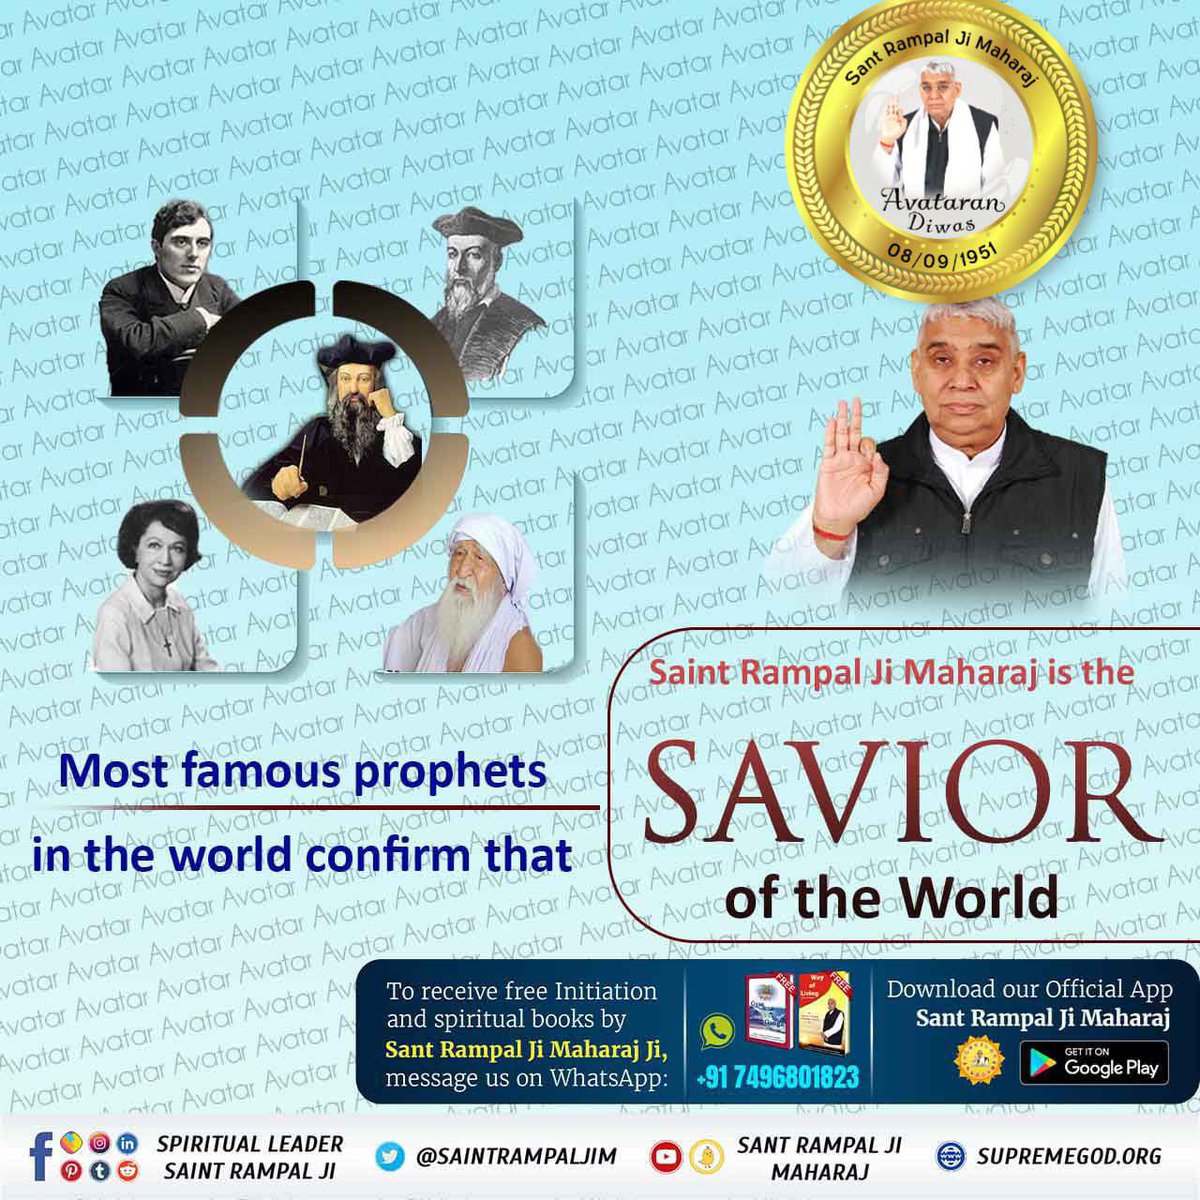 #PoliticsOfLies
#जगत_उद्धारक_संत_रामपालजी
Most famous prophets in the world confirm that Saint Rampal Ji Maharaj is the real SAVIOUR of the World.
👉 For more info, kindly read the sacred books 'Gyan Ganga' and 'Way Of Living'.✳️🙏✳️
#GodMorningSunday 
#SundayThoughts